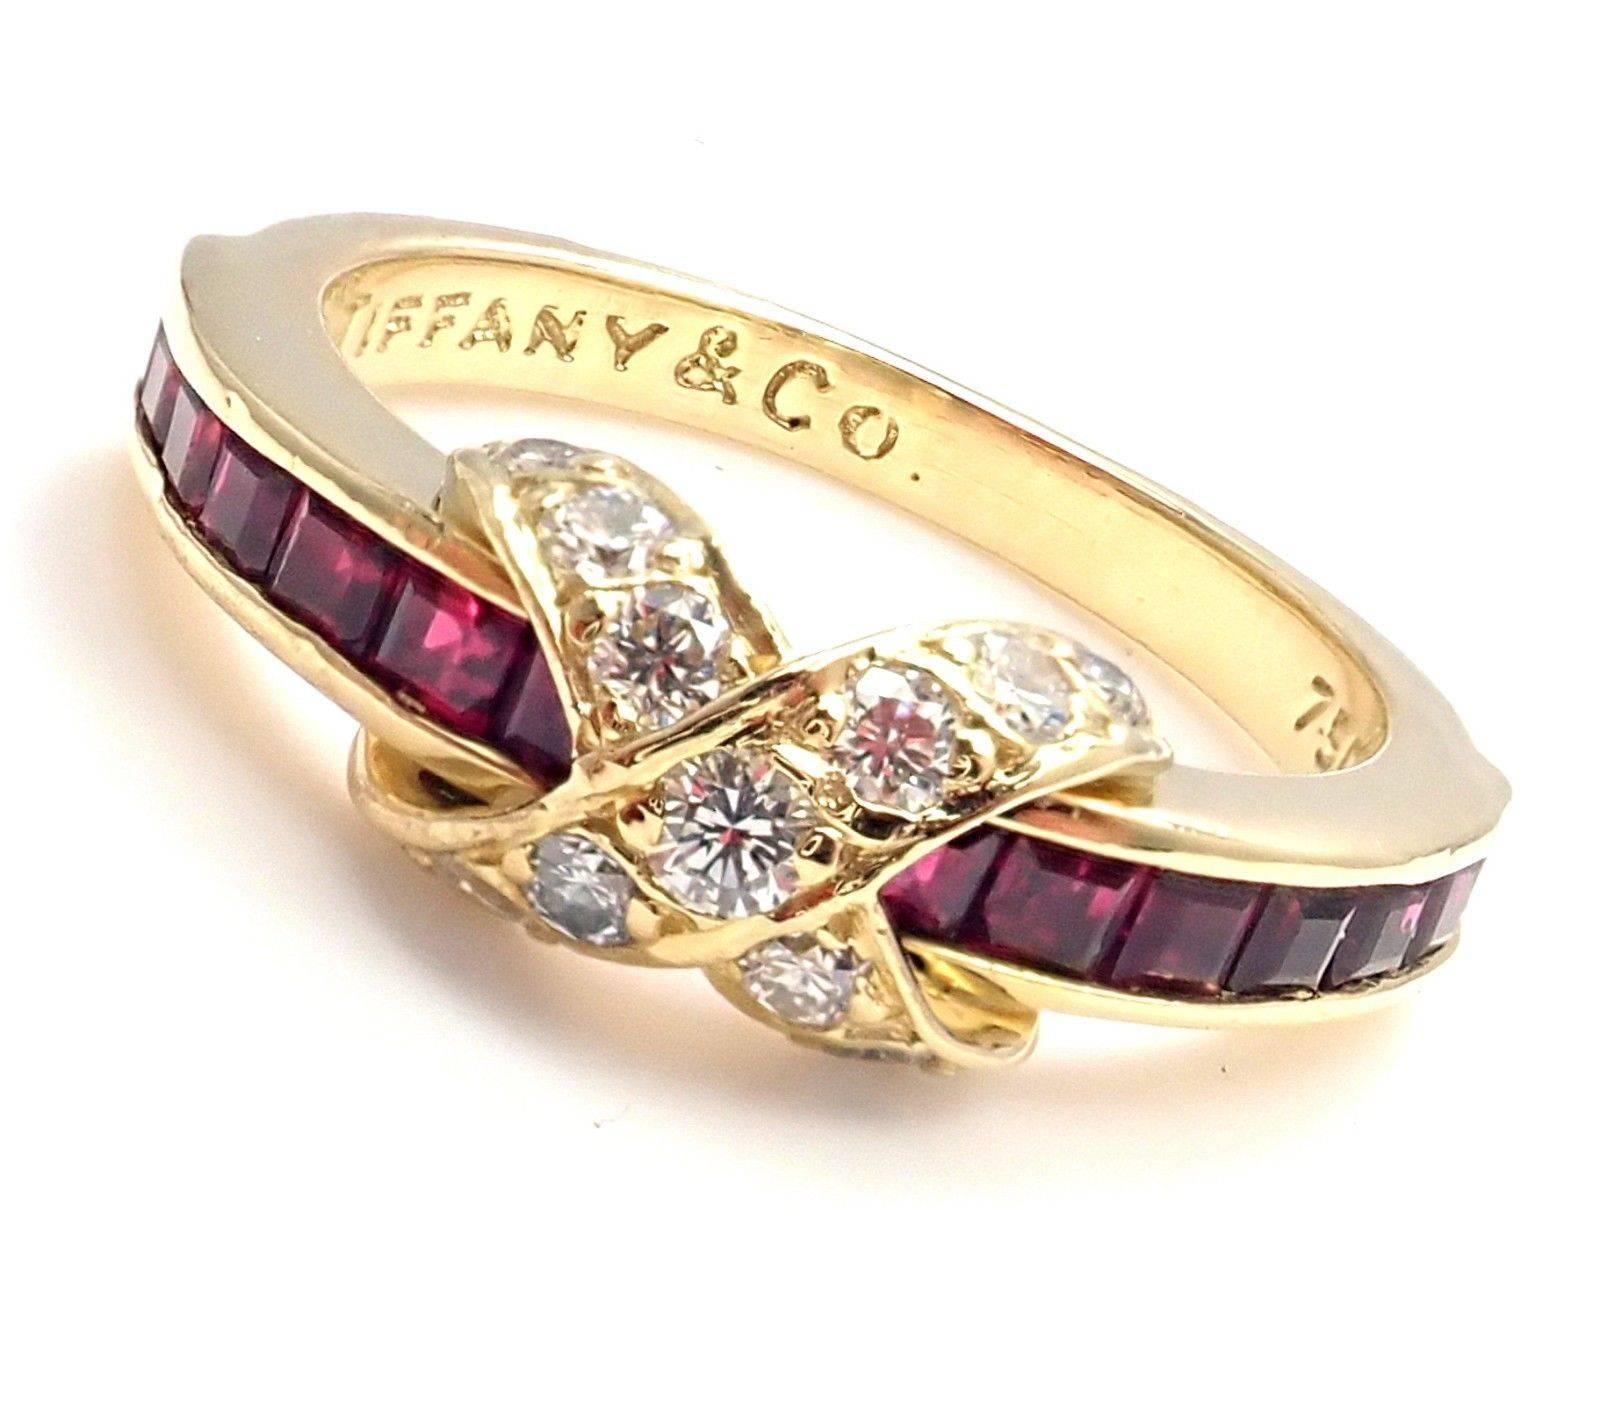 18k Yellow Gold Diamond X Ruby Band Ring by Tiffany & Co.
With 14 round shape diamonds VS1 clarity G color
total weight approx. .28ct and 14 rubies.
Details: 
Ring Size: 6.5 (can be resized)
Weight: 4.2 grams
Width: 6mm
Stamped Hallmarks: Tiffany &